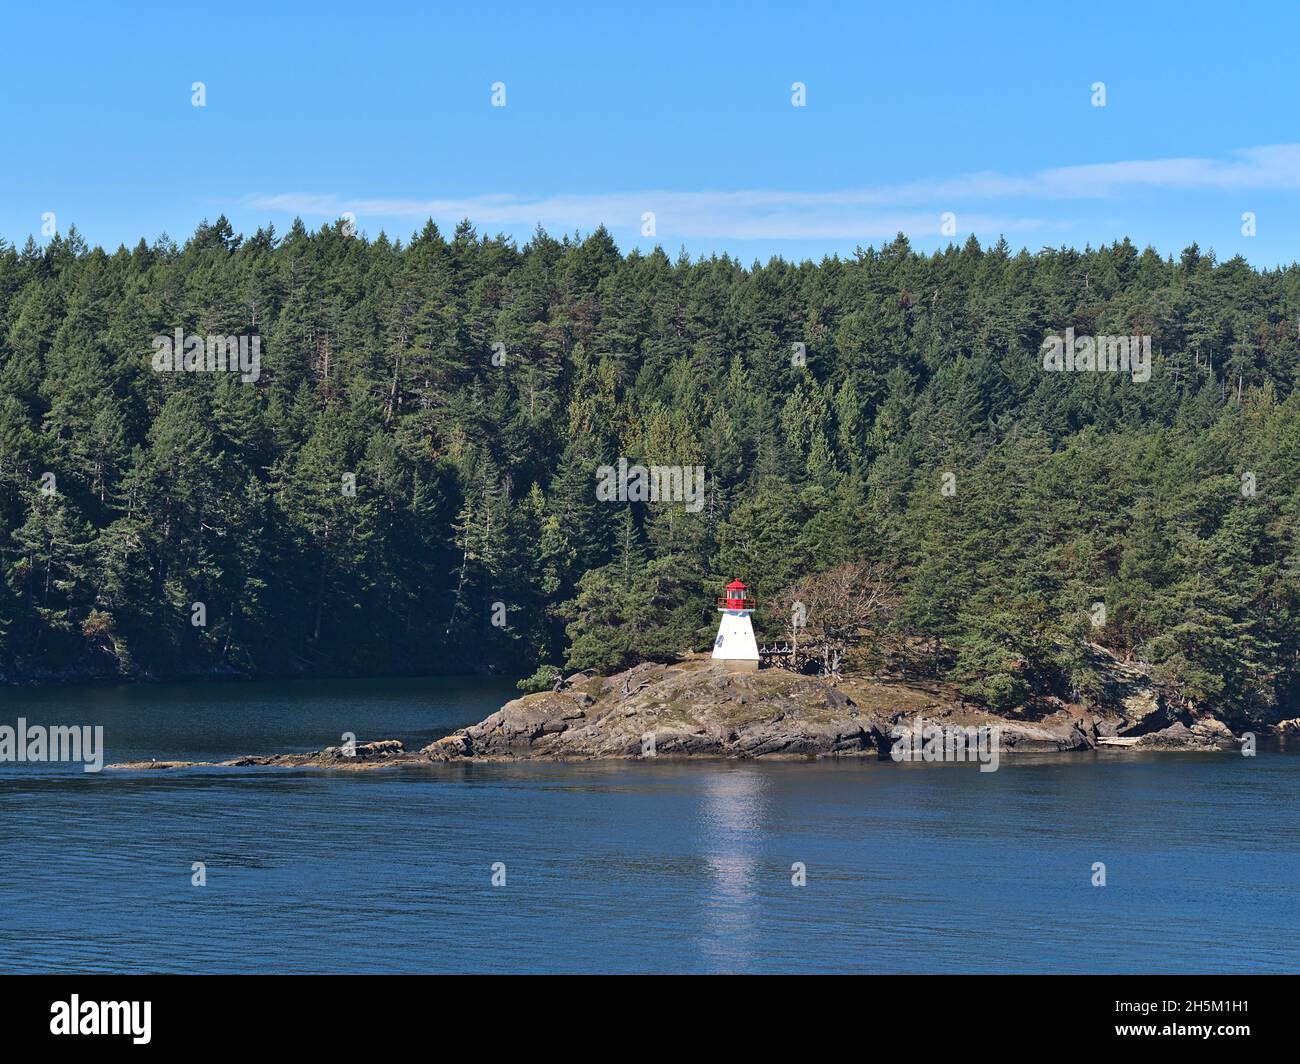 Beautiful view of Portlock Point Lighthouse on Prevost Island, part of the Gulf Islands in British Columbia, Canada in the Salish Sea on sunny day. Stock Photo